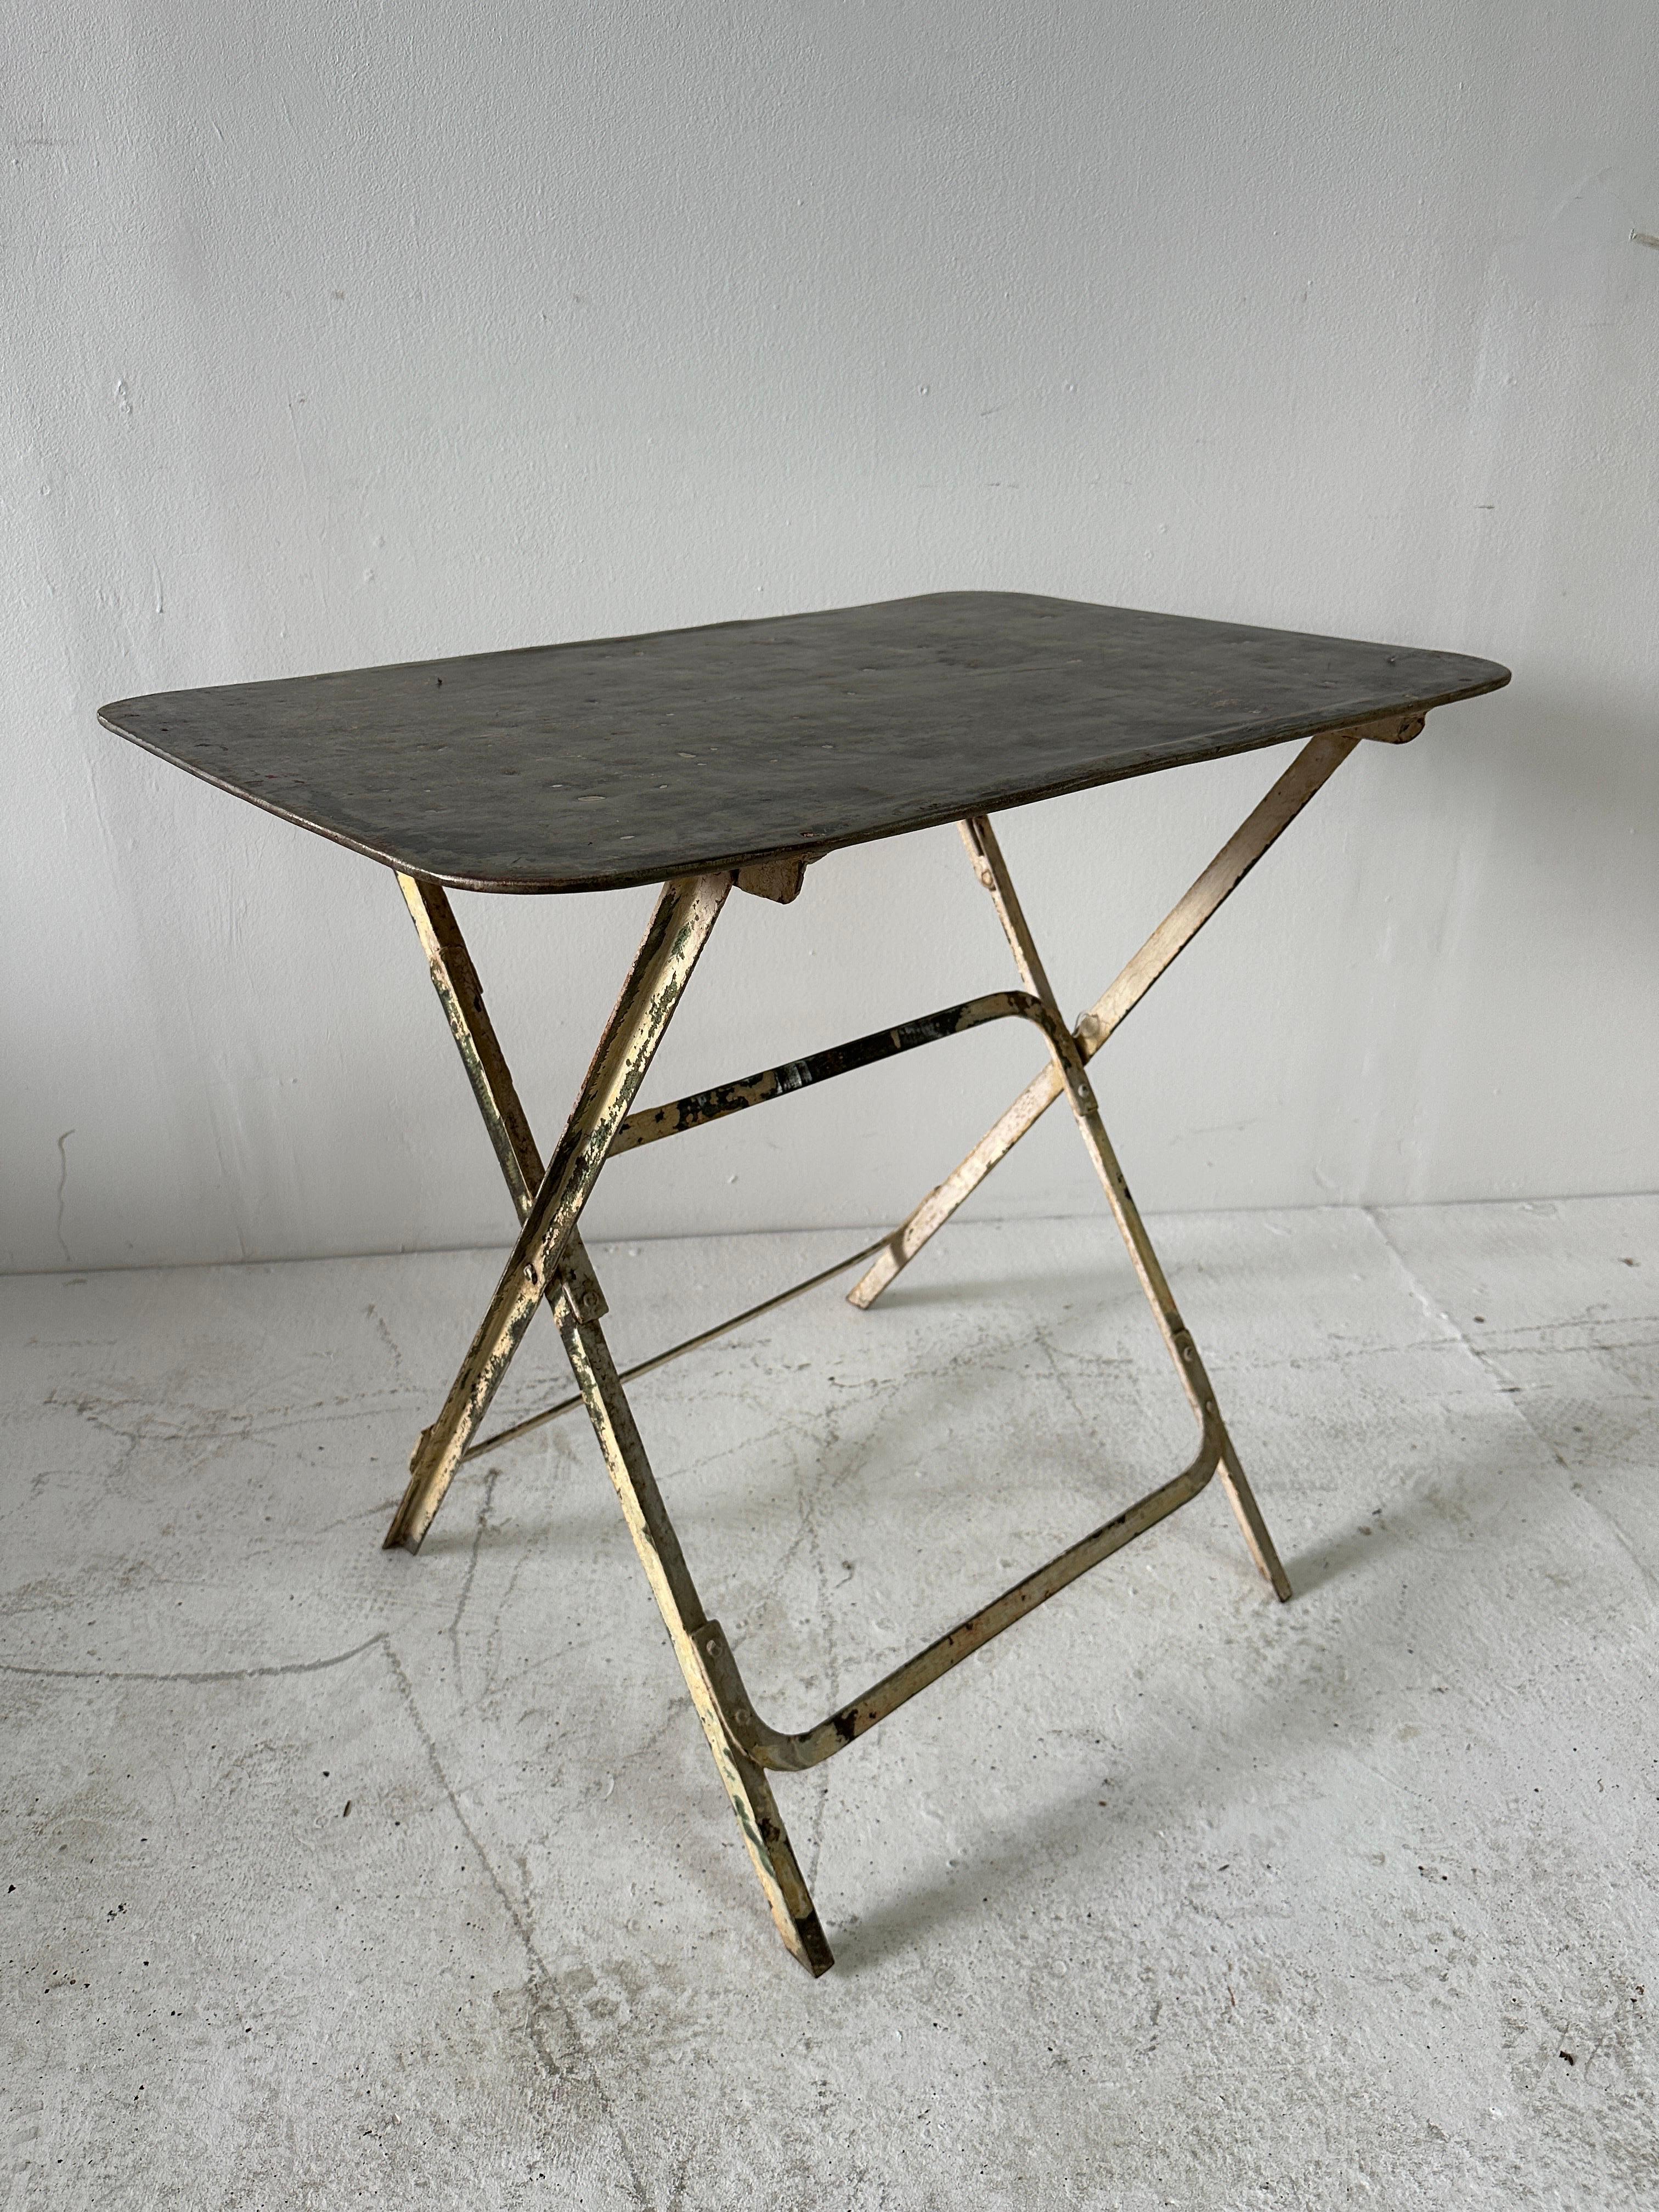 Vintage French Industrial & Distressed Metal Bistro Folding Table For Sale 2